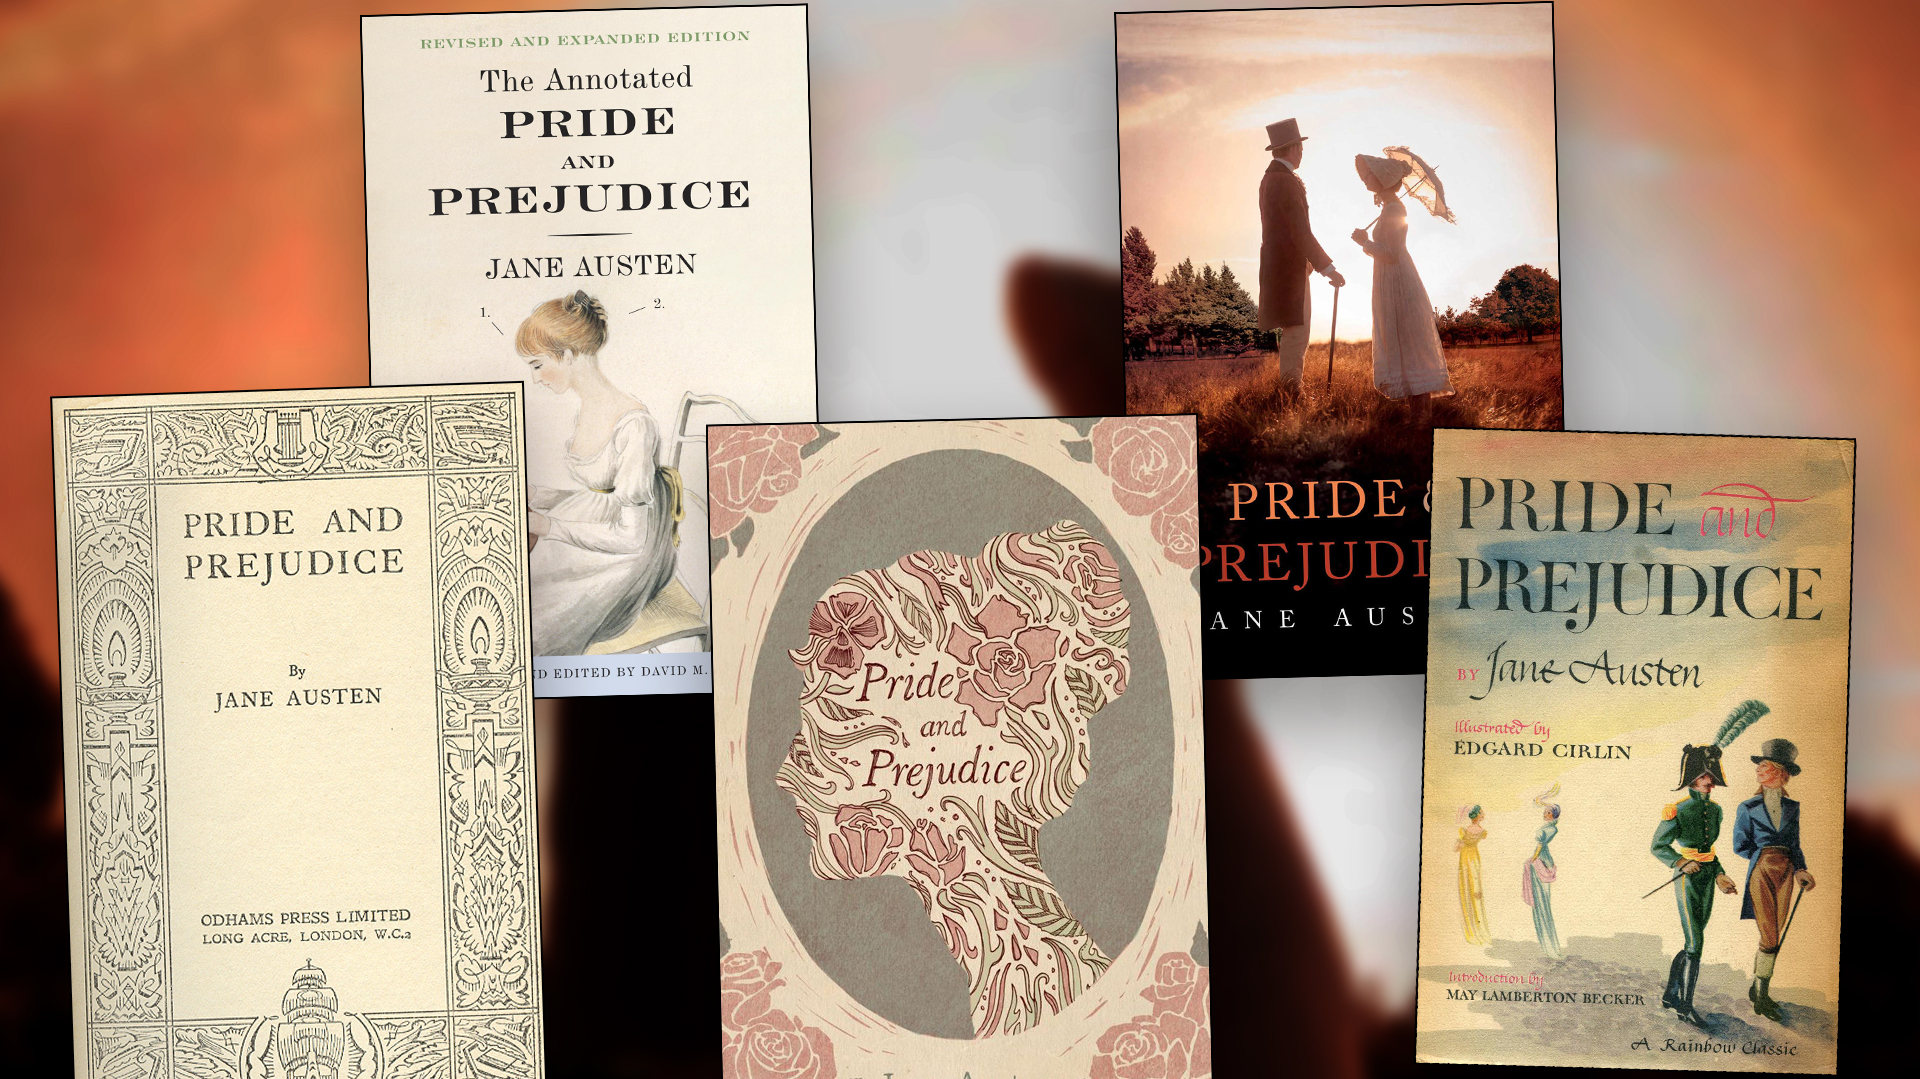 Over the years, different tapas from "Pride and Prejudice" by Jane Austen